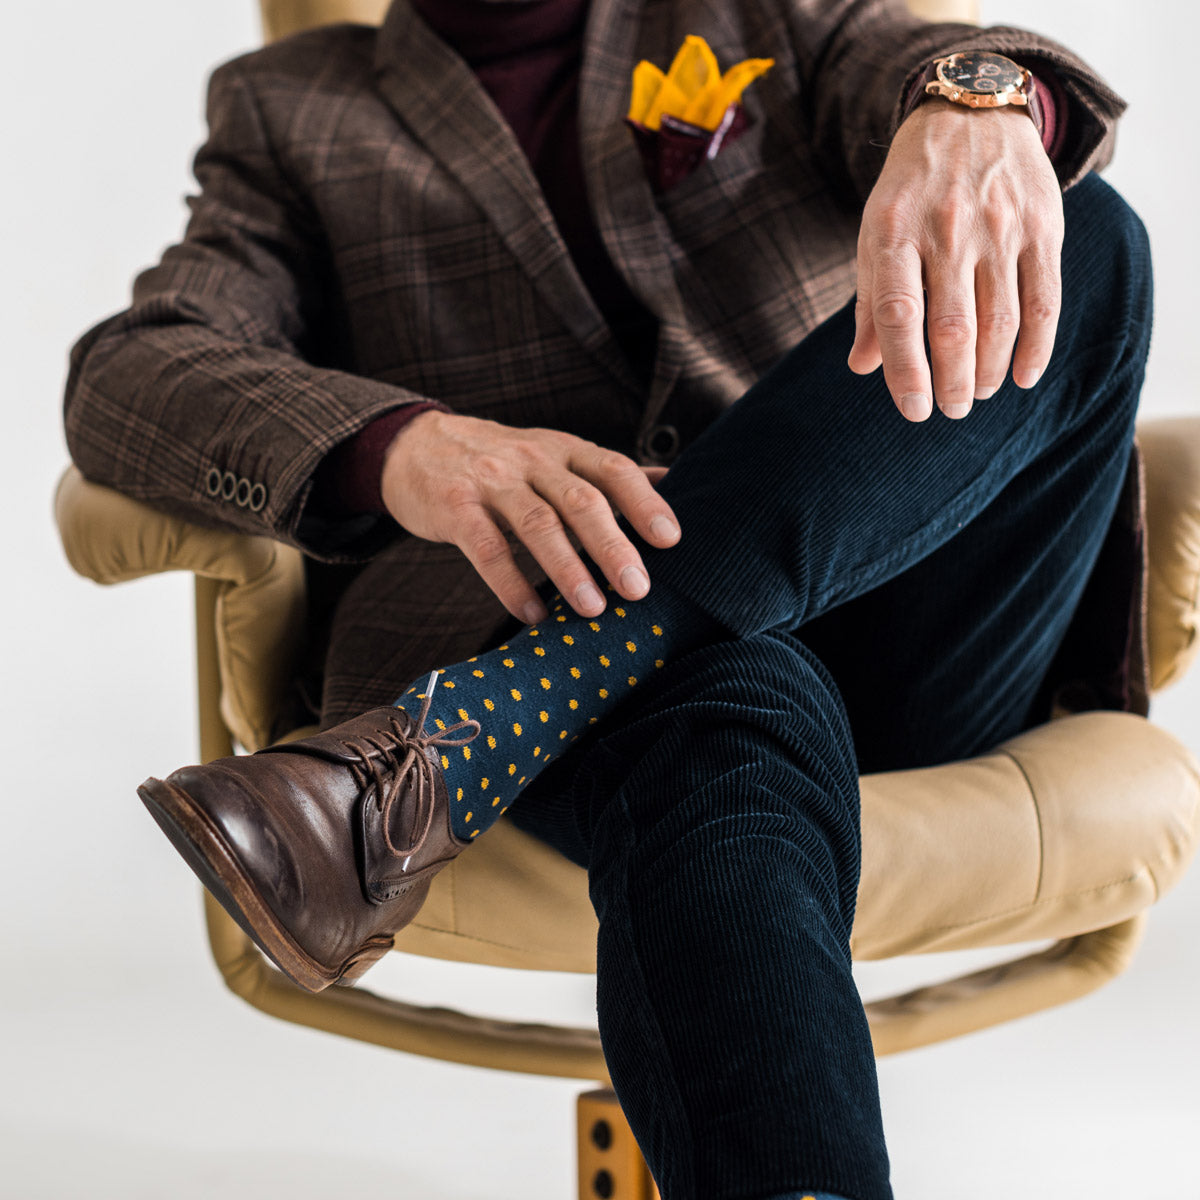 A man crosses his legs to show dress socks in navy with yellow polka dots worn with brown men's dress shoes